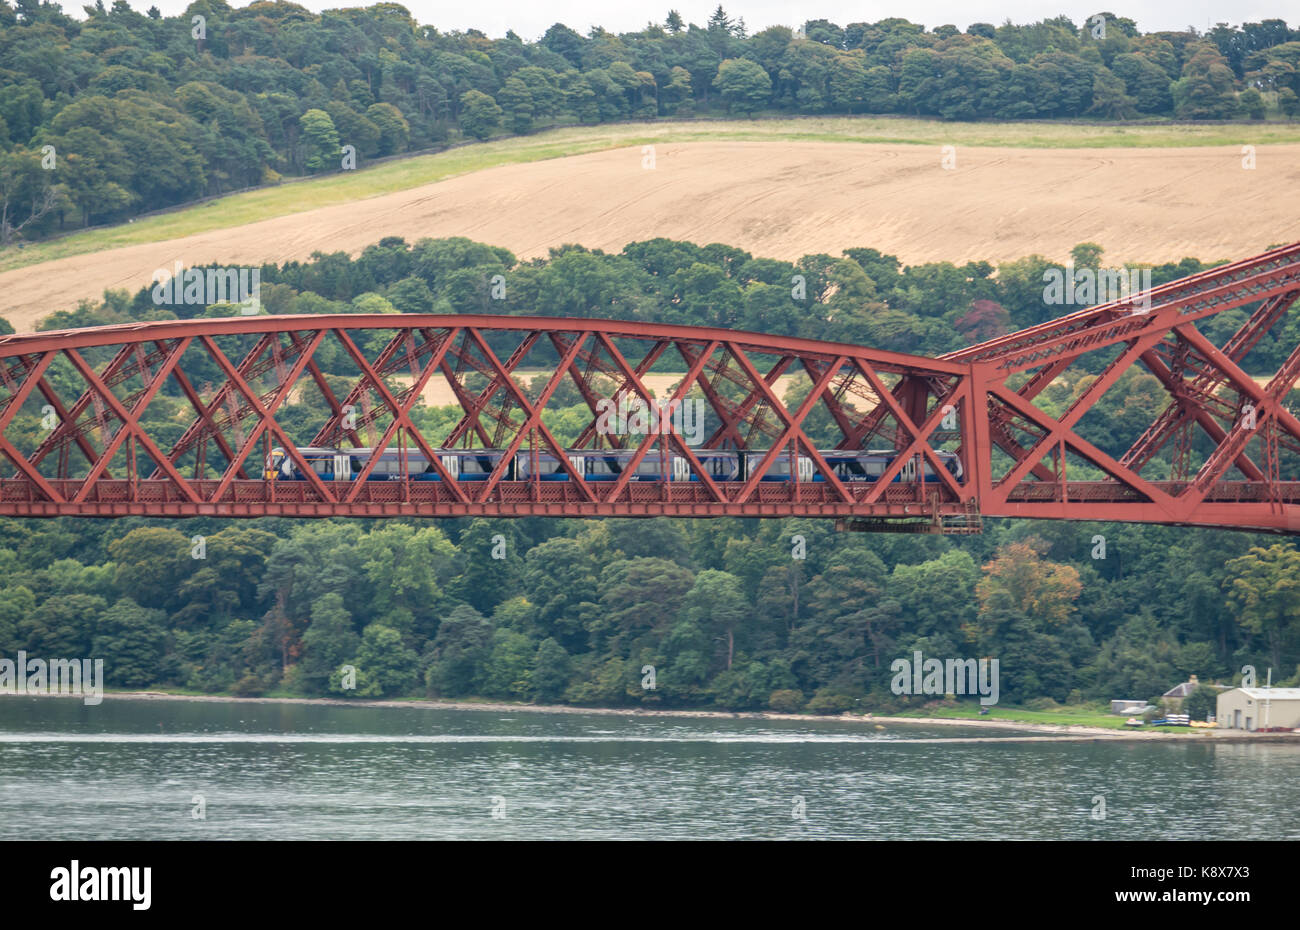 View of a ScotRail train on cantilever Forth Rail Bridge over Firth of Forth, Scotland, UK Stock Photo